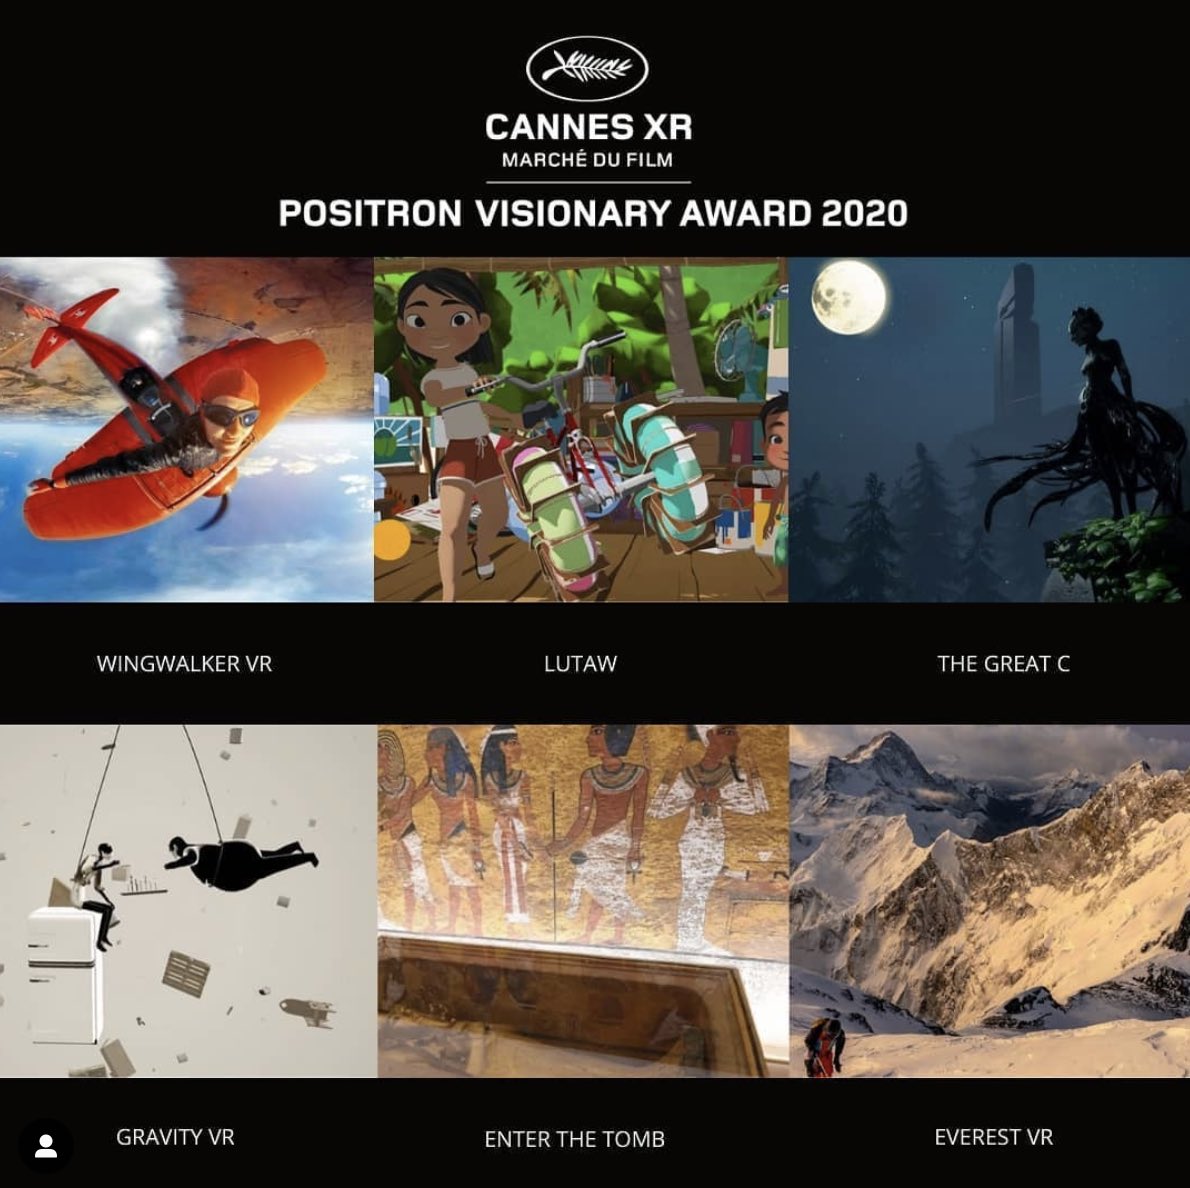 Today the @CannesXr winner will be announced at 3:15pET! You can watch the live stream on @YouTube or meet us in virtual reality in the Museum of Other Realities. #lutawvr #yellowboatofhope #HopeSails  #vrfilm #positron #award #cannesxr #gopositron